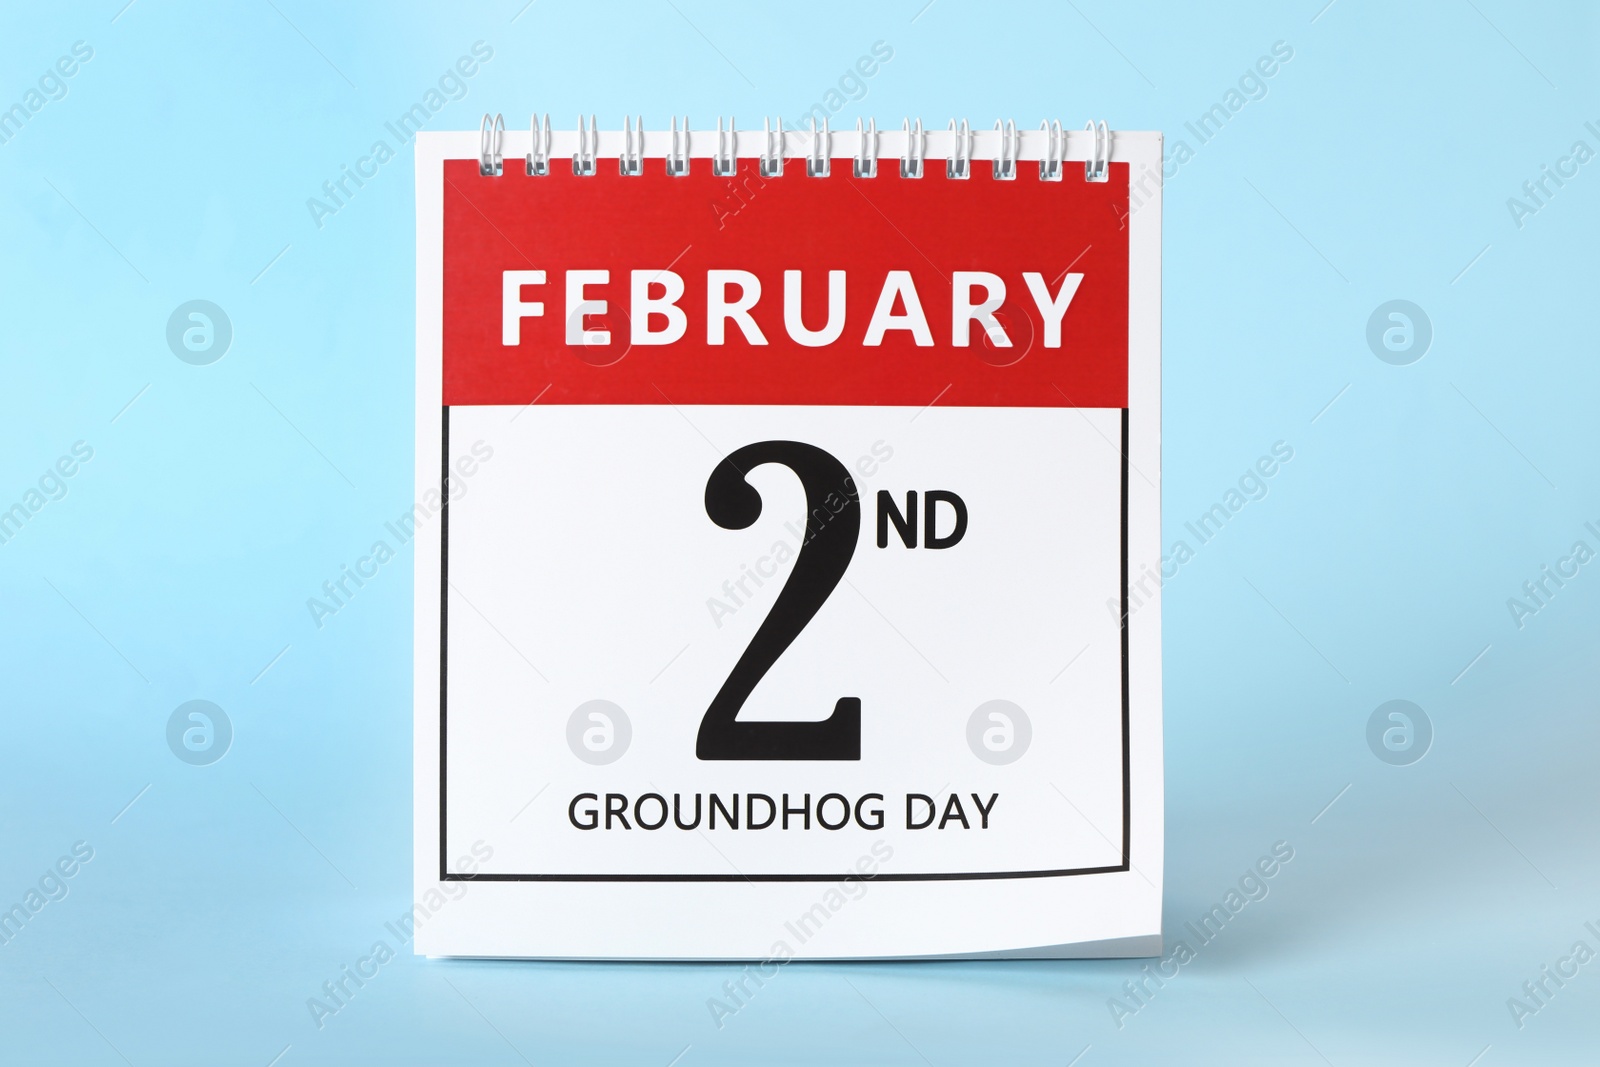 Photo of Calendar with date February 2nd on light blue background. Groundhog day